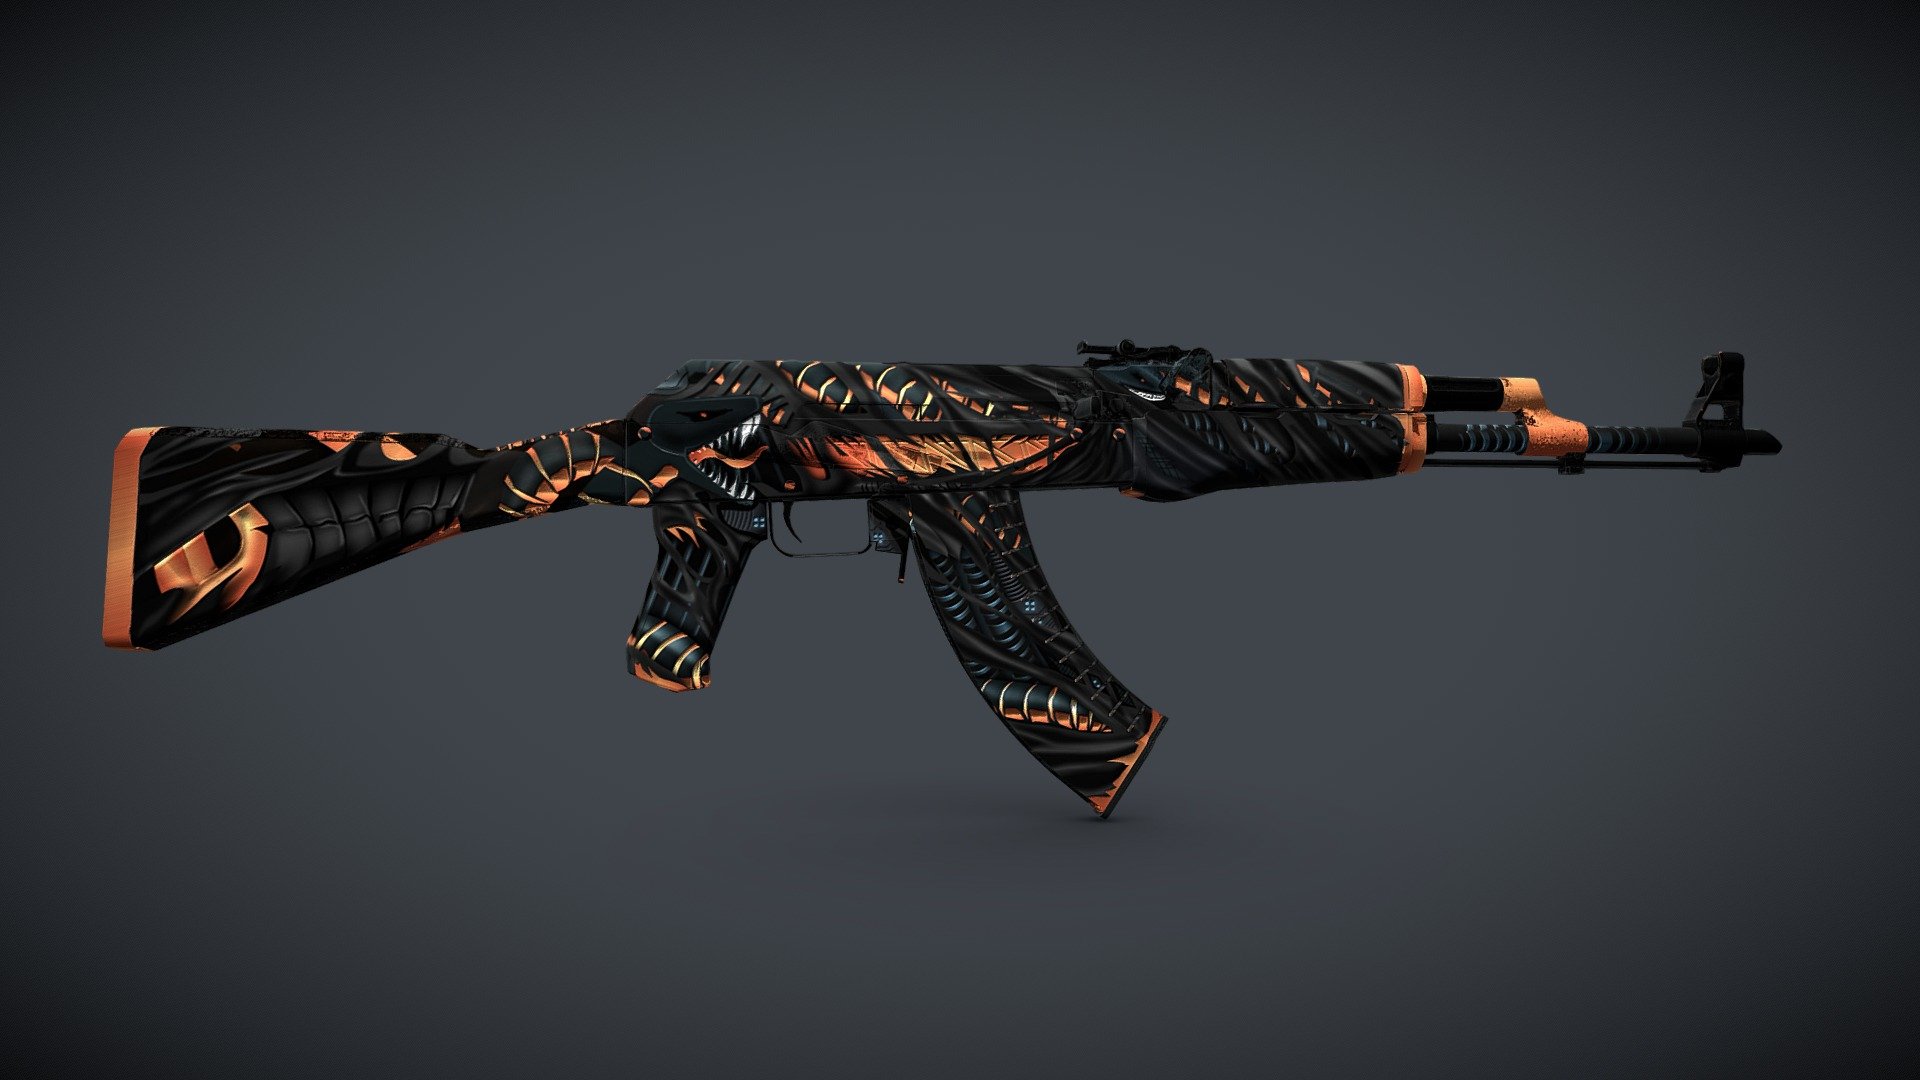 Link Workshop : https://steamcommunity.com/sharedfiles/filedetails/?id=775369146

My inspiration for this skin comes from some movies like Alien (1979), The Thing (1982), Predator (1987), Enemy (1985), Contamination (1981) or Extra sangsues (1986). 

The drawing represents the skin of the alien. The color blue symbolizes electronics and orange color is here to represent the energy. We can see different Alien faces on the skin. Thanks to lights and shadows, the drawing is in relief..and comes alive ! 

The difficulty was to adapt it on each item knowing that AK-47 (UV). 
The black skin represents Xenomorph’s skin in Alien 3d model